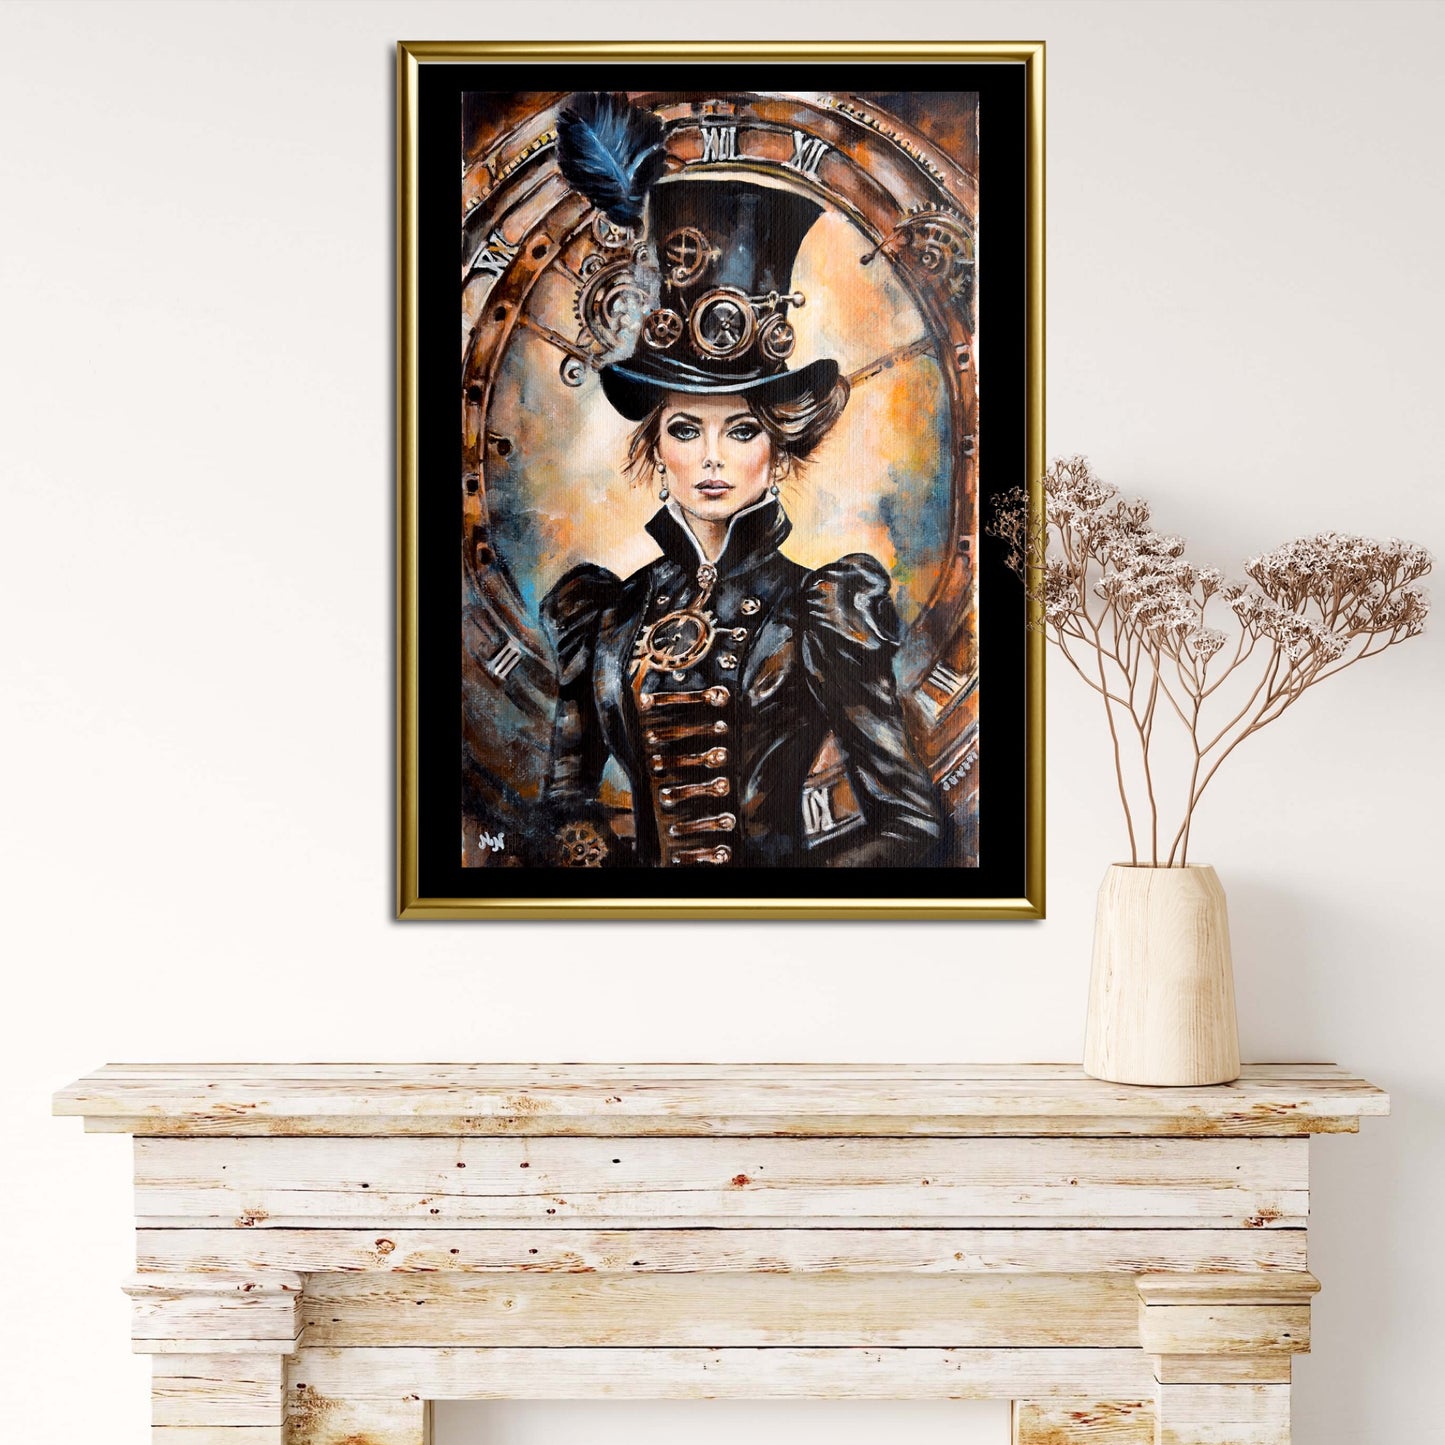 Steampunk Lady: Visual feast of bronze, copper, and cogwheel motifs in a futuristic composition.